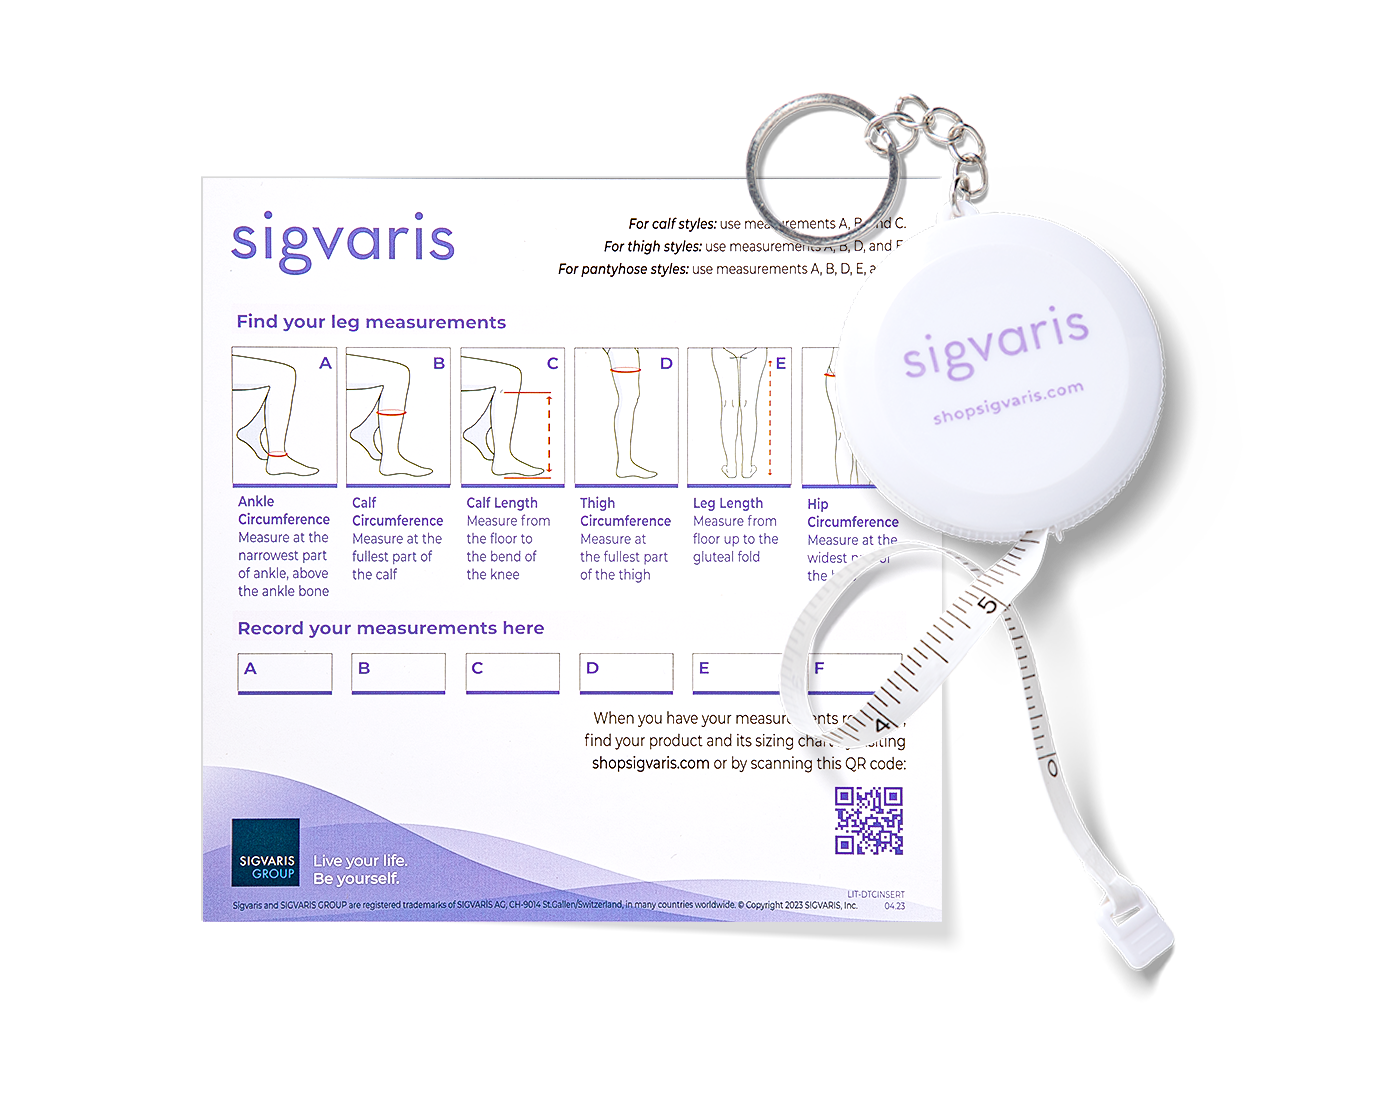 Sigvaris Sizing Kit, including one tape measure and an instruction card